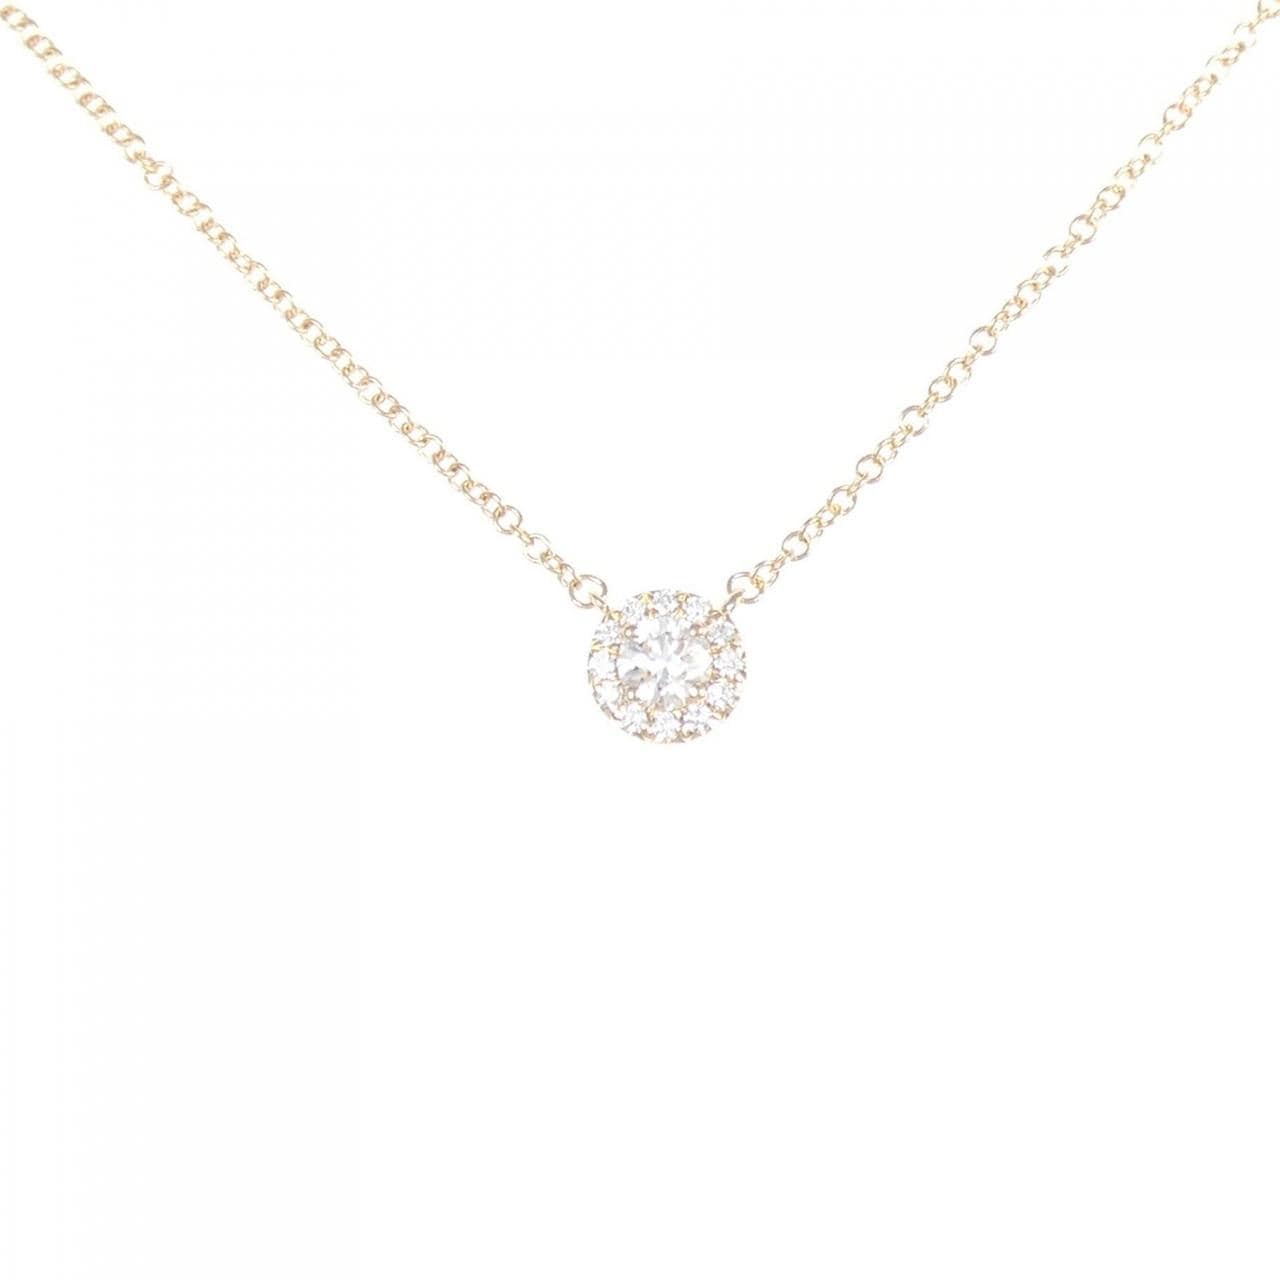 TIFFANY solest necklace